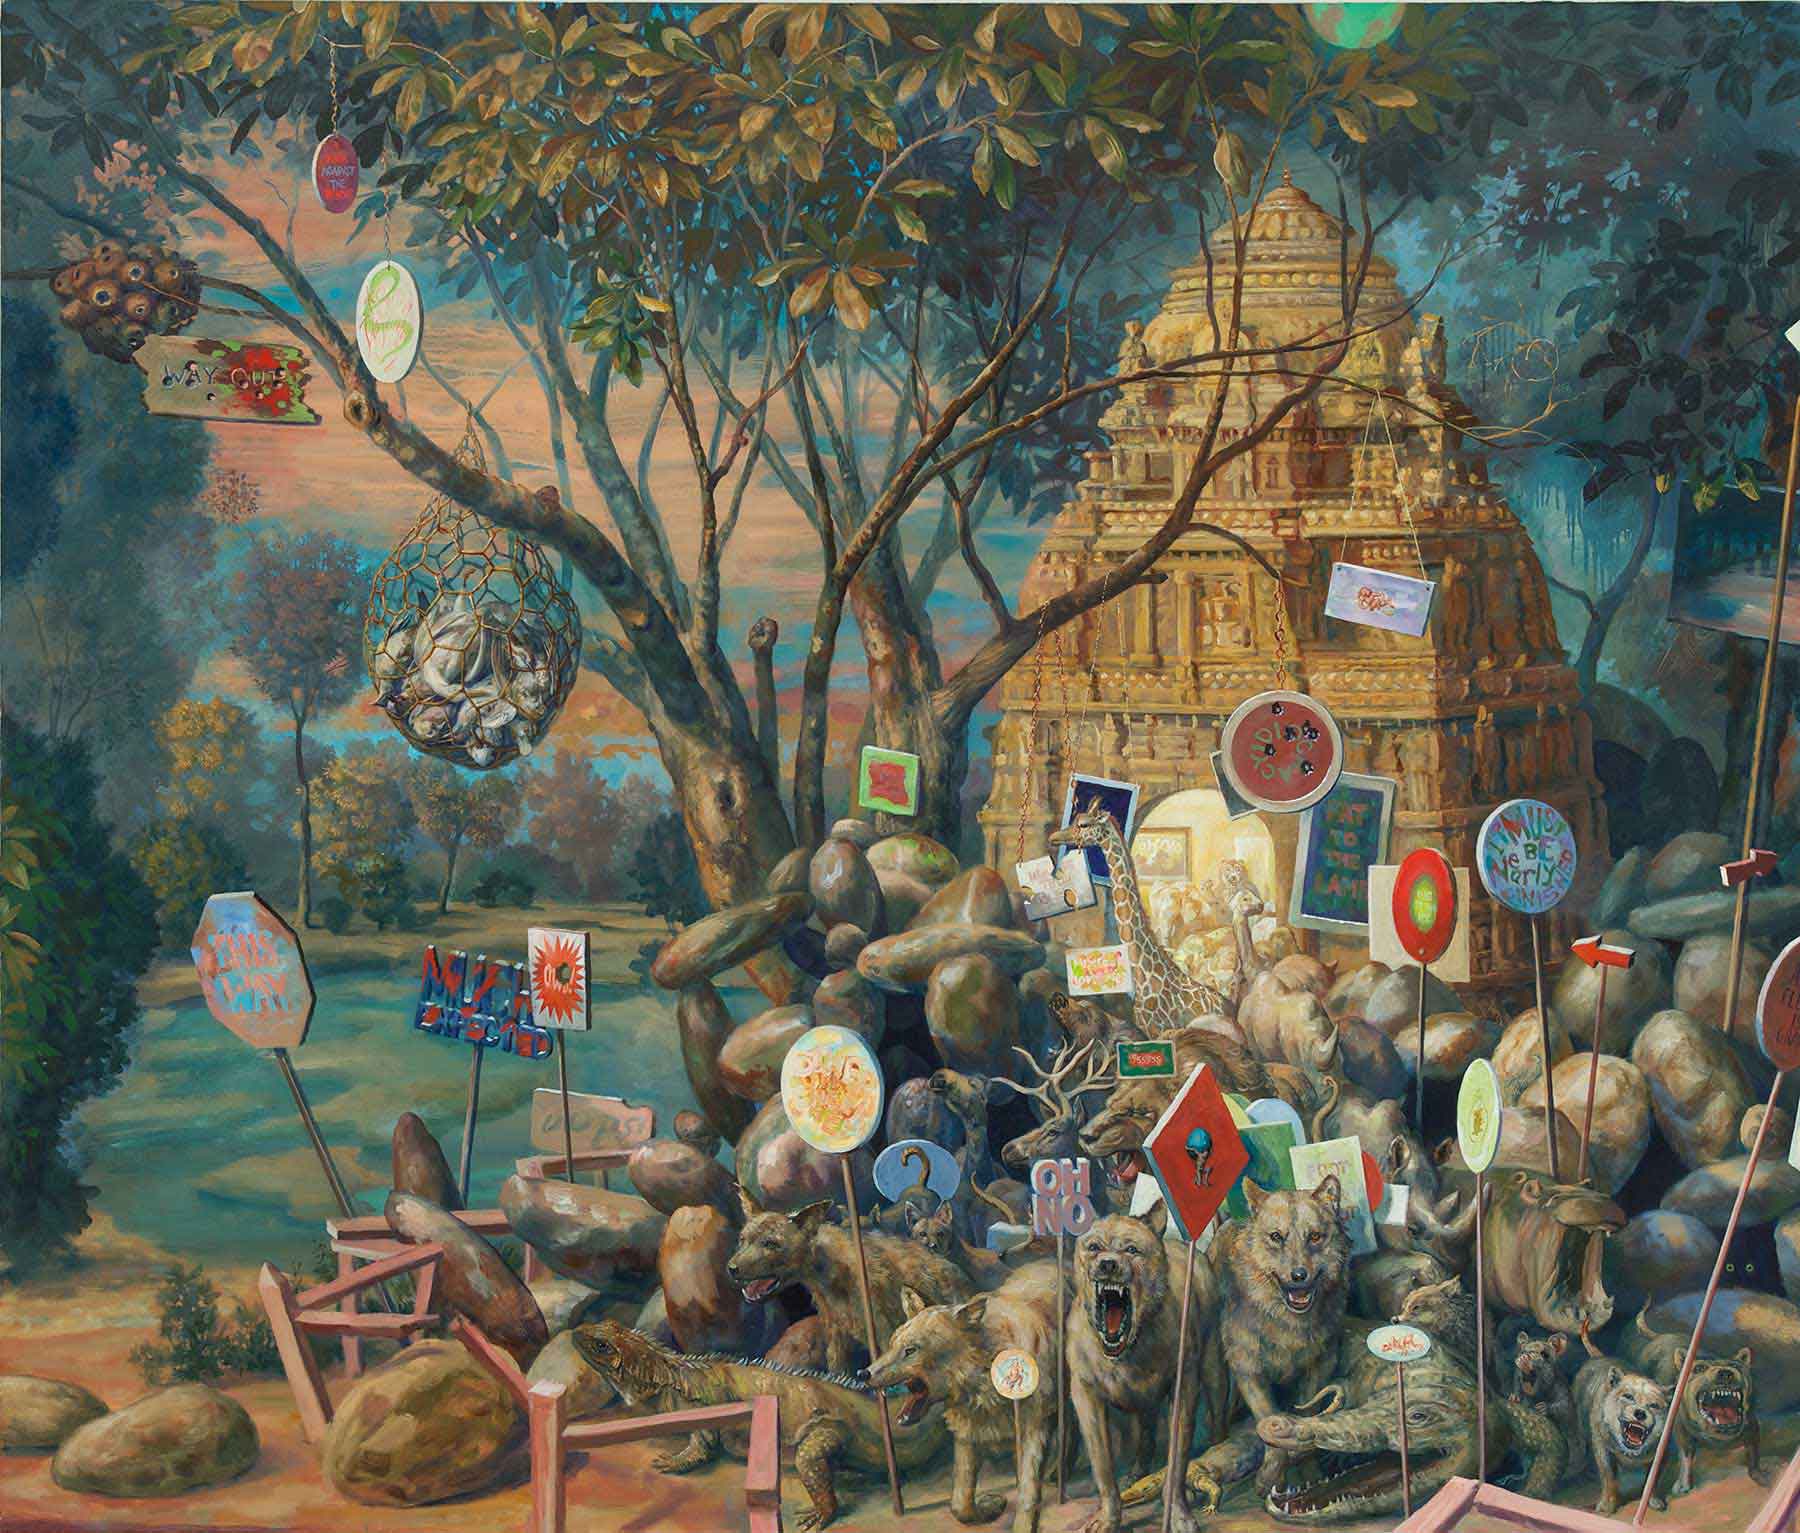 painting of temple burial mound with animals and signs